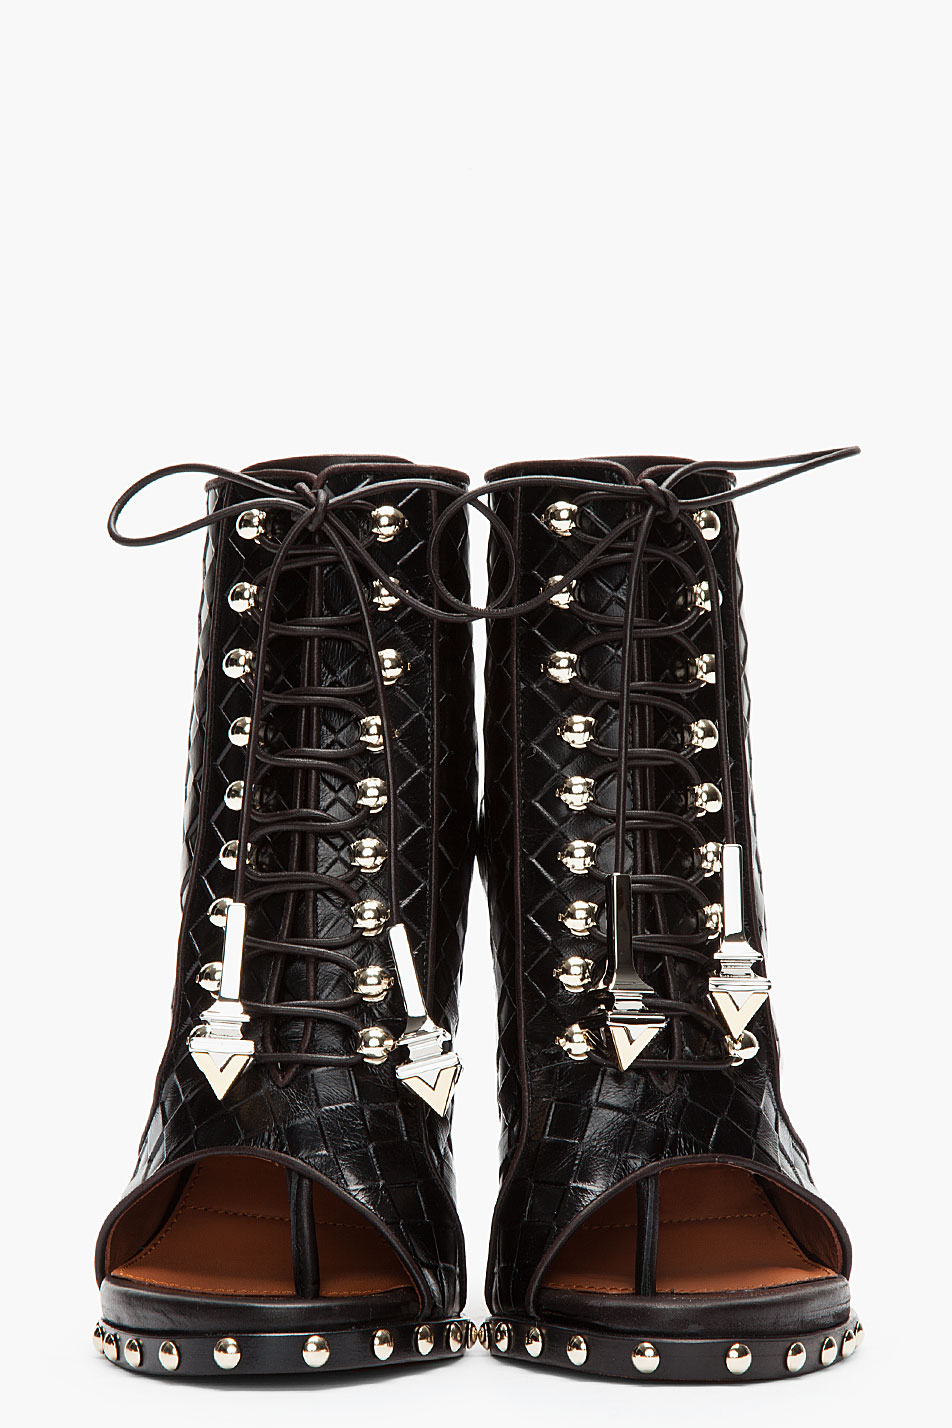 Lyst - Givenchy Black Embossed Leather Open Toe Studded Ankle Boots in ...